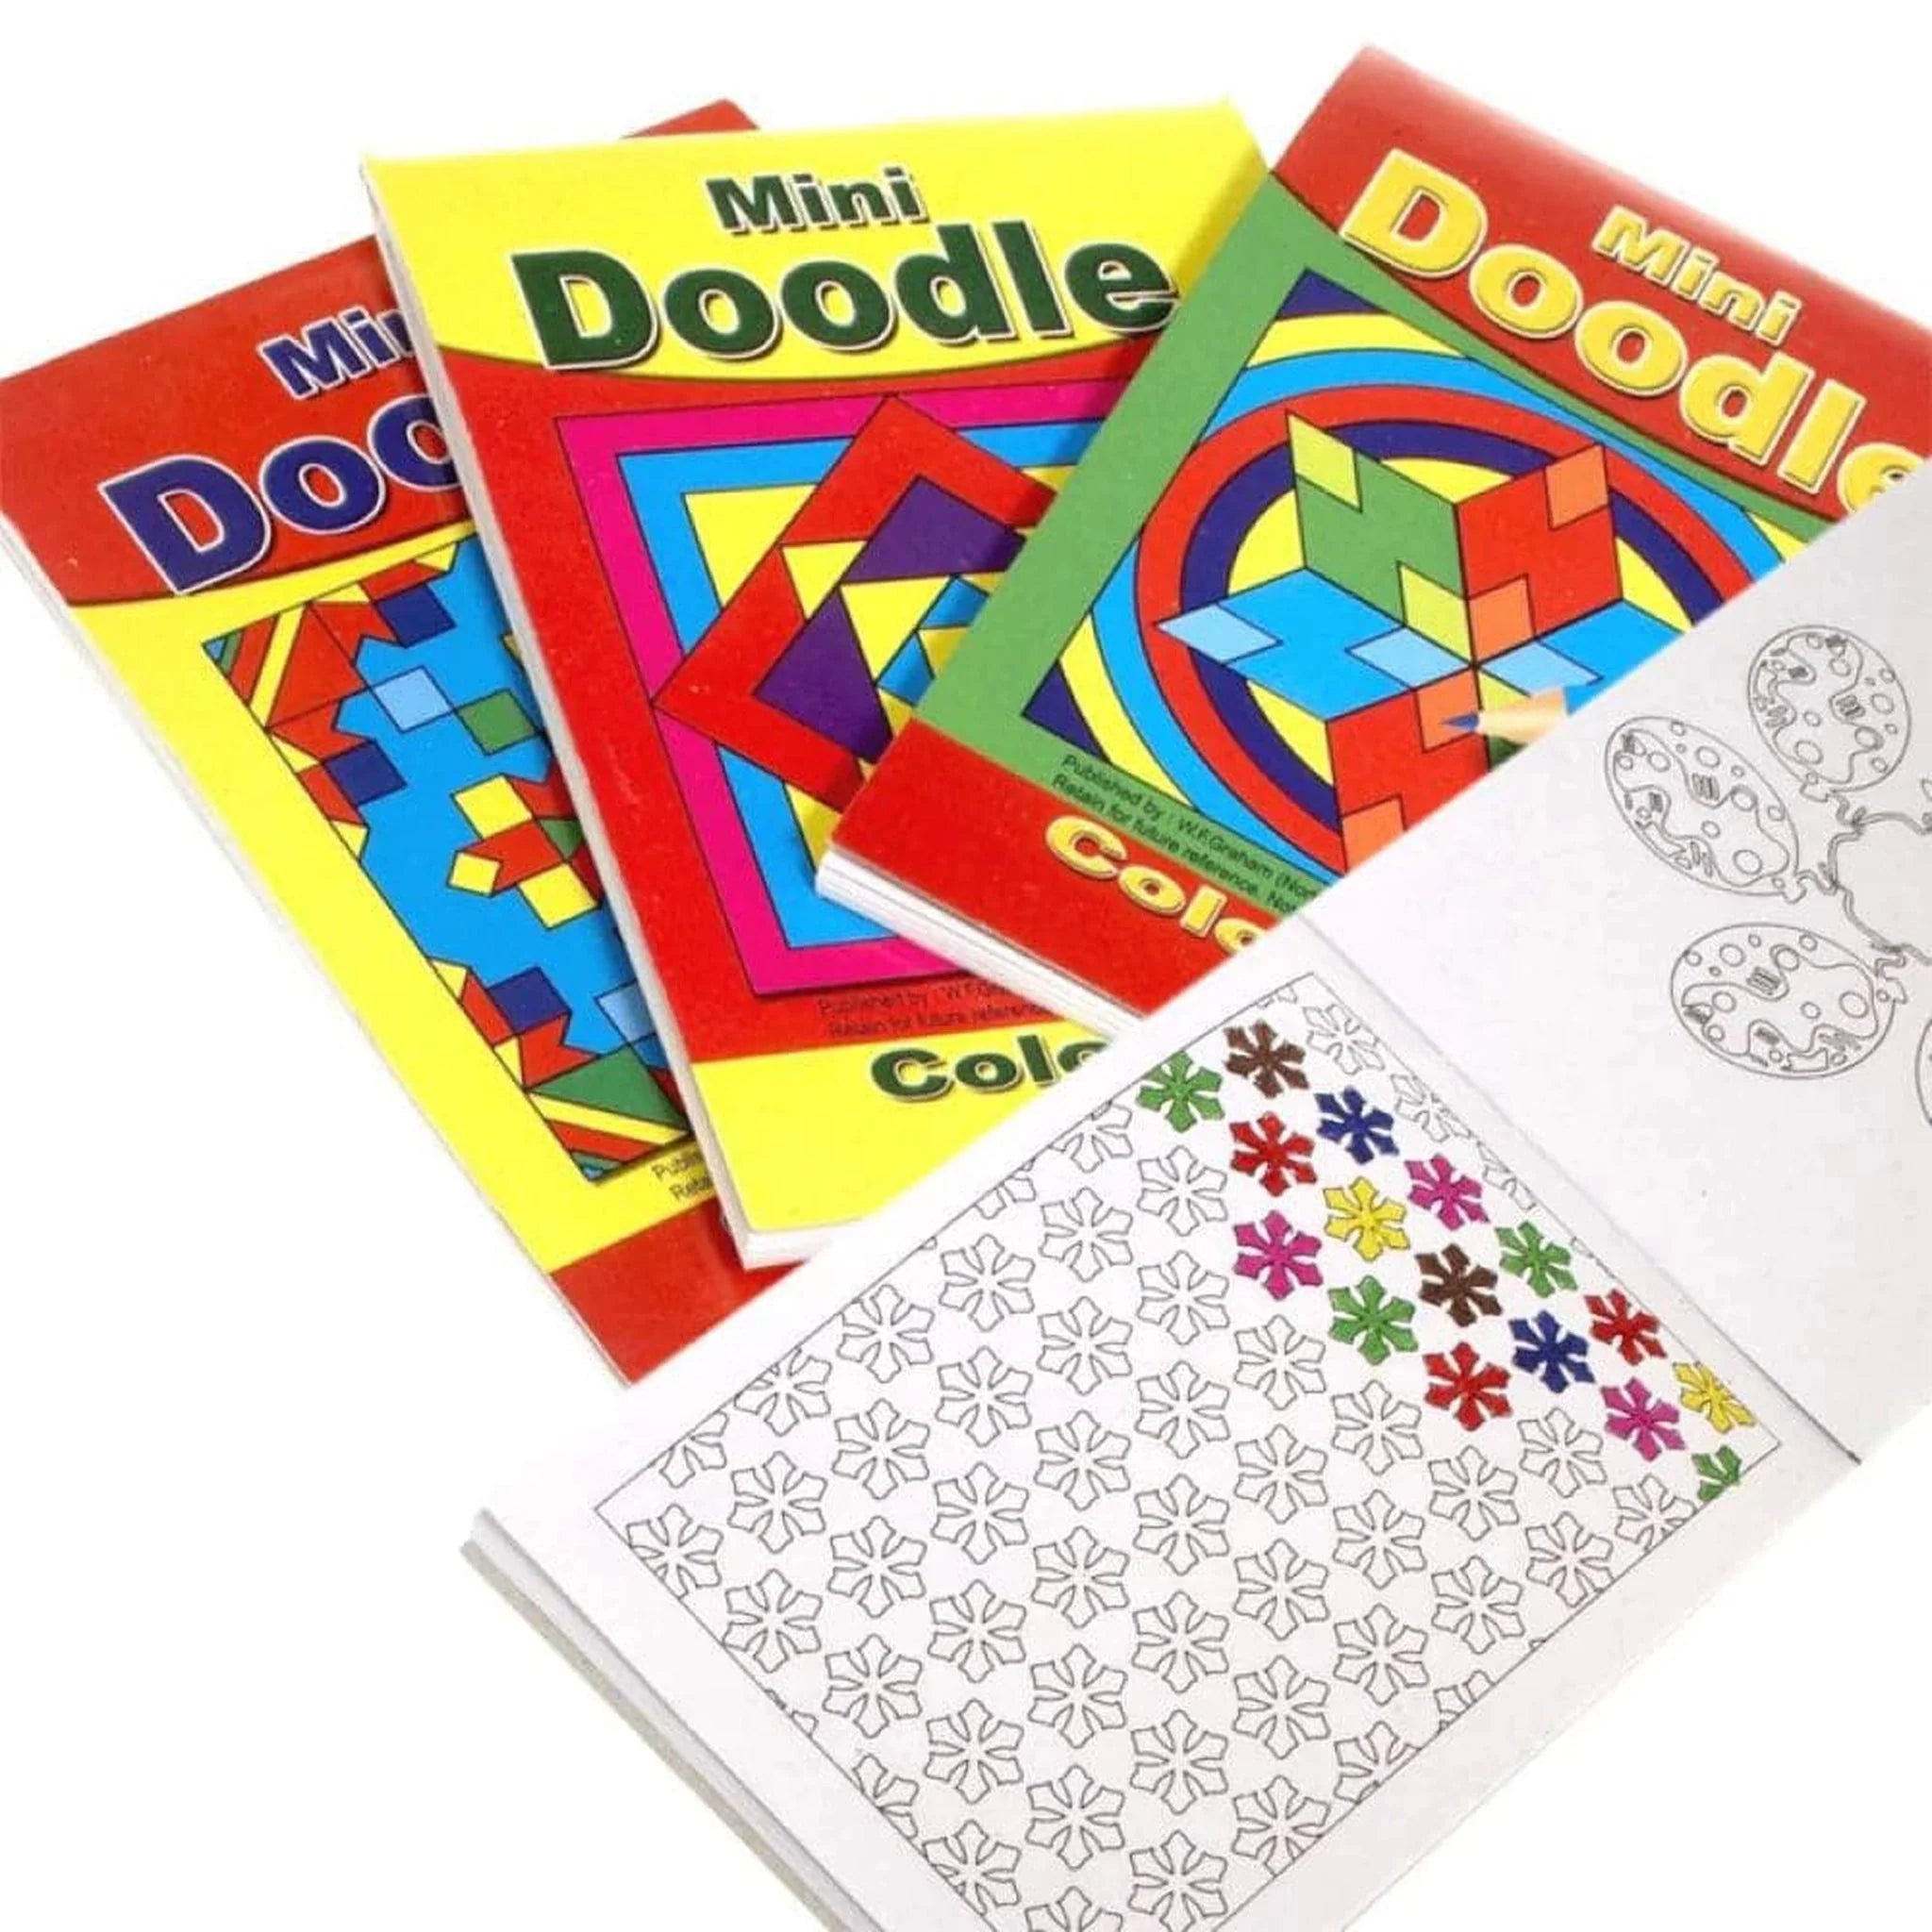 A6 Doodle Book 48 page - Kids Party Craft